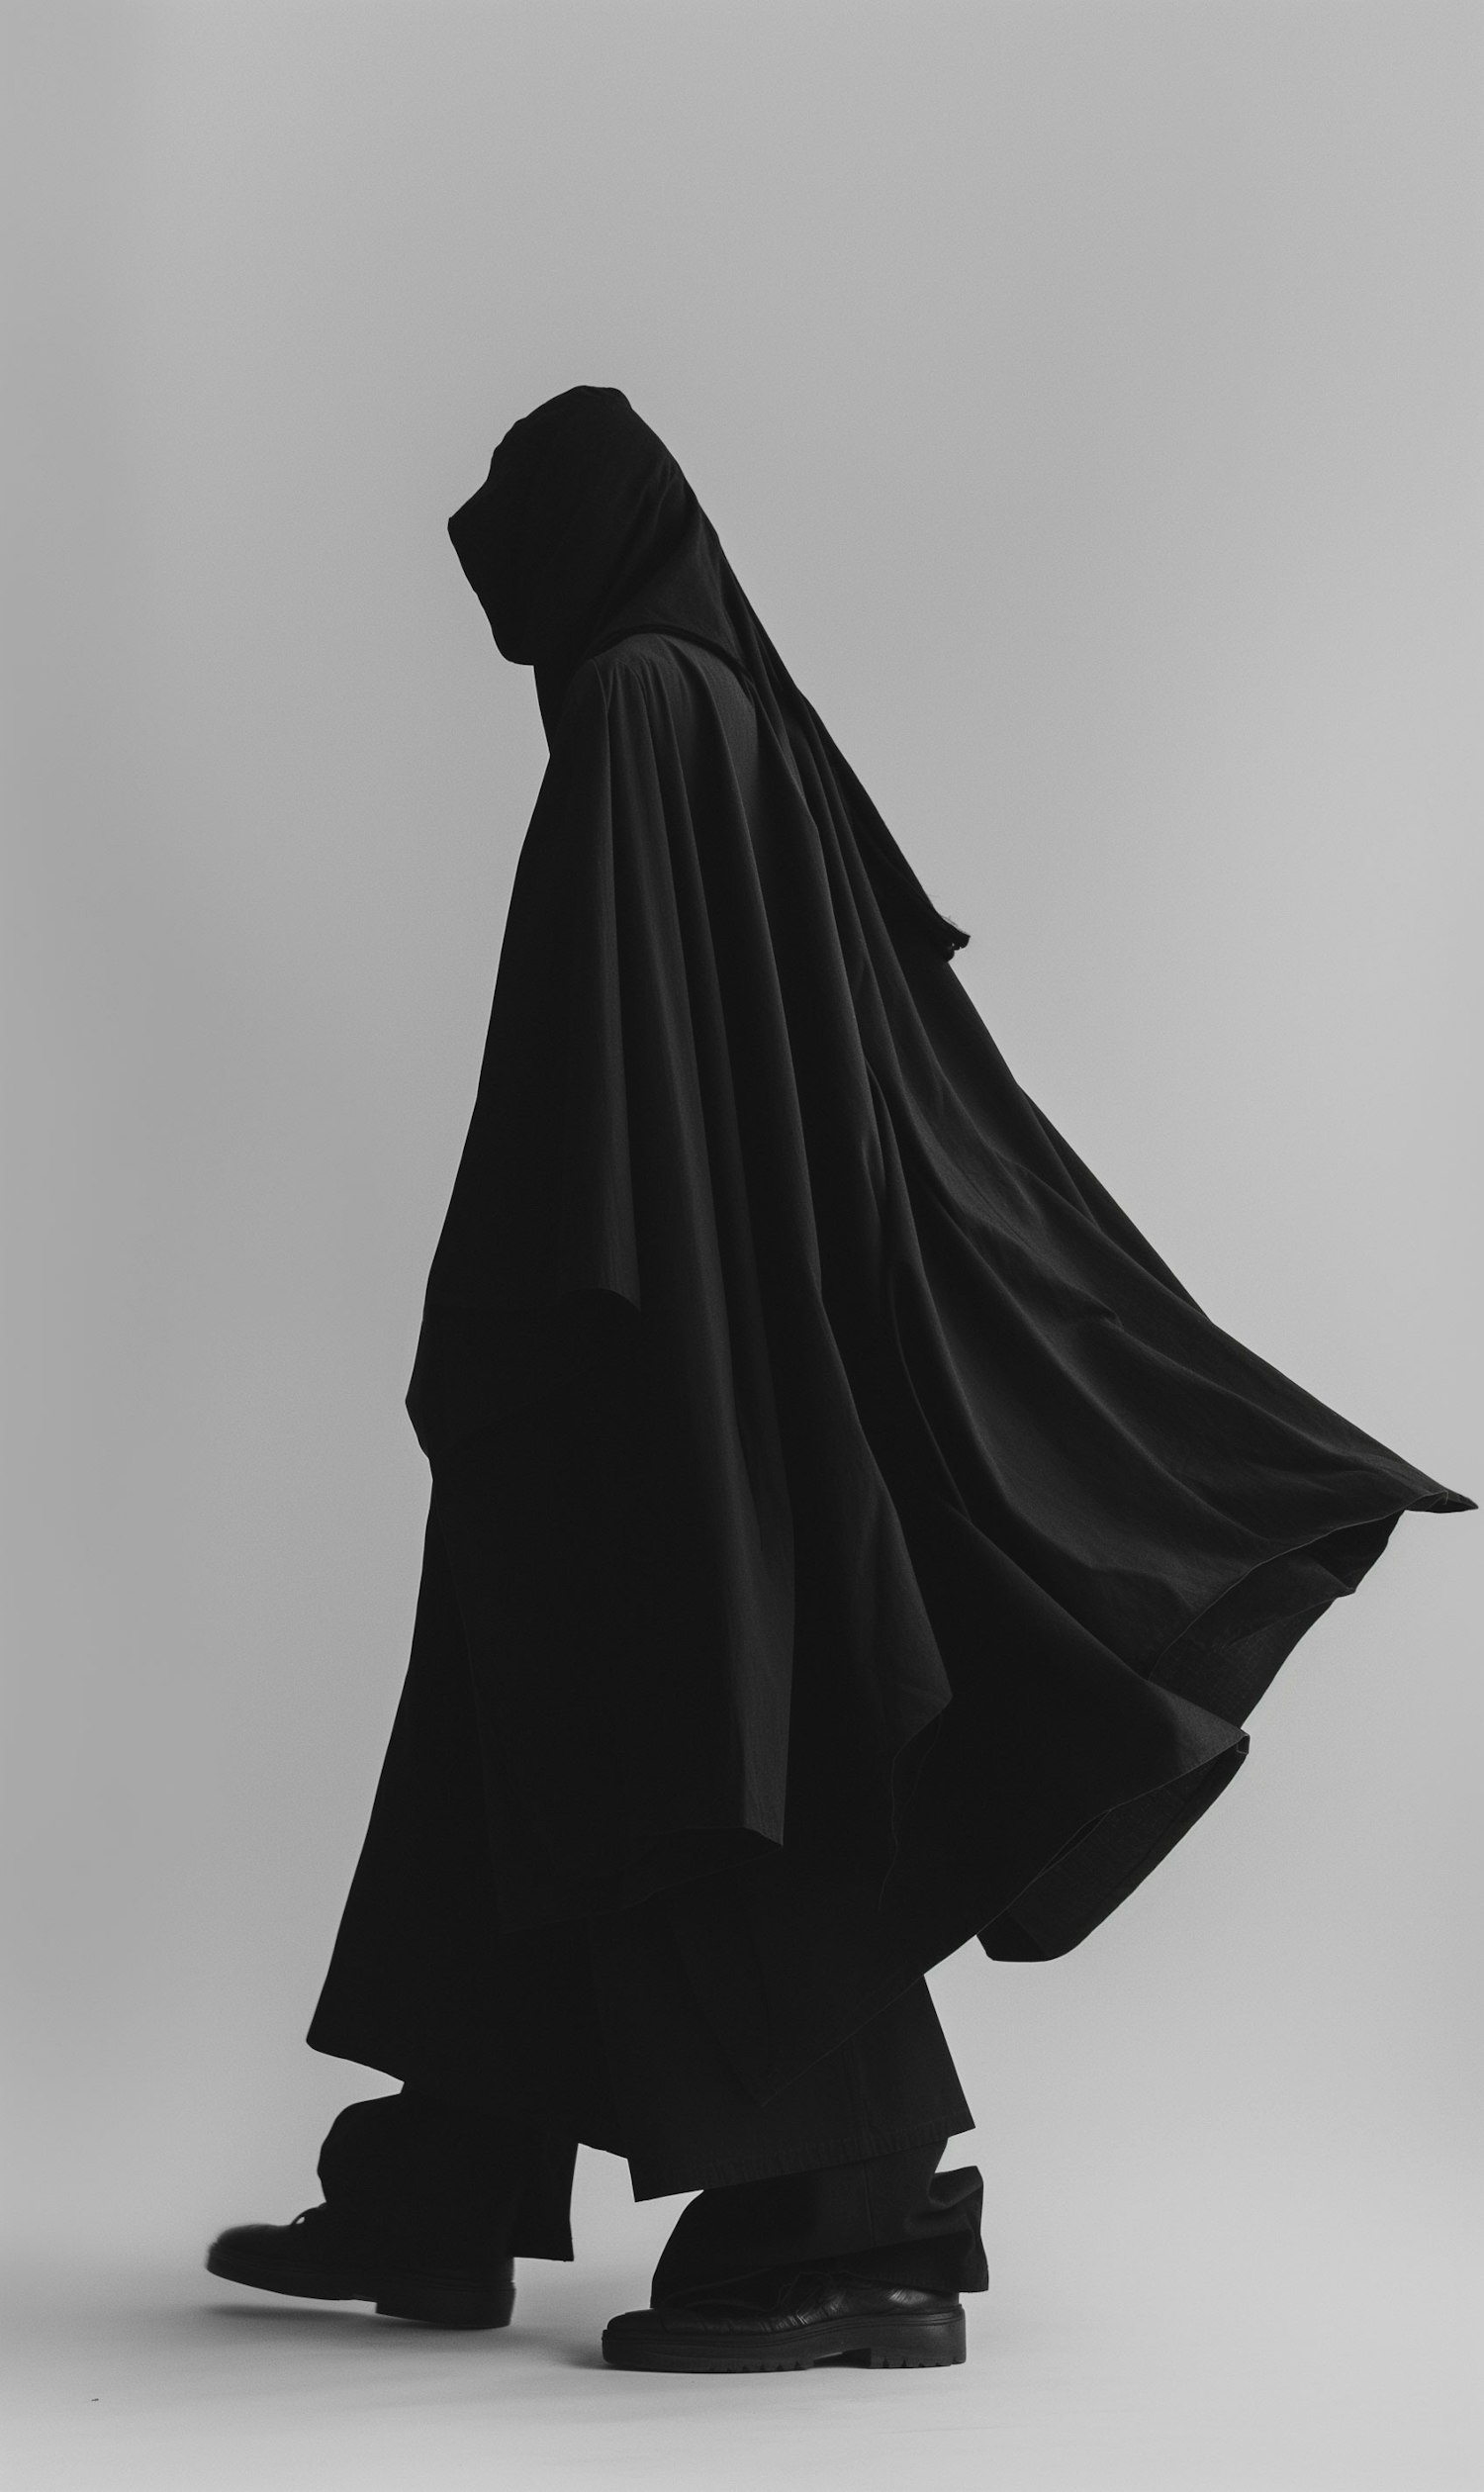 Mysterious Cloaked Figure